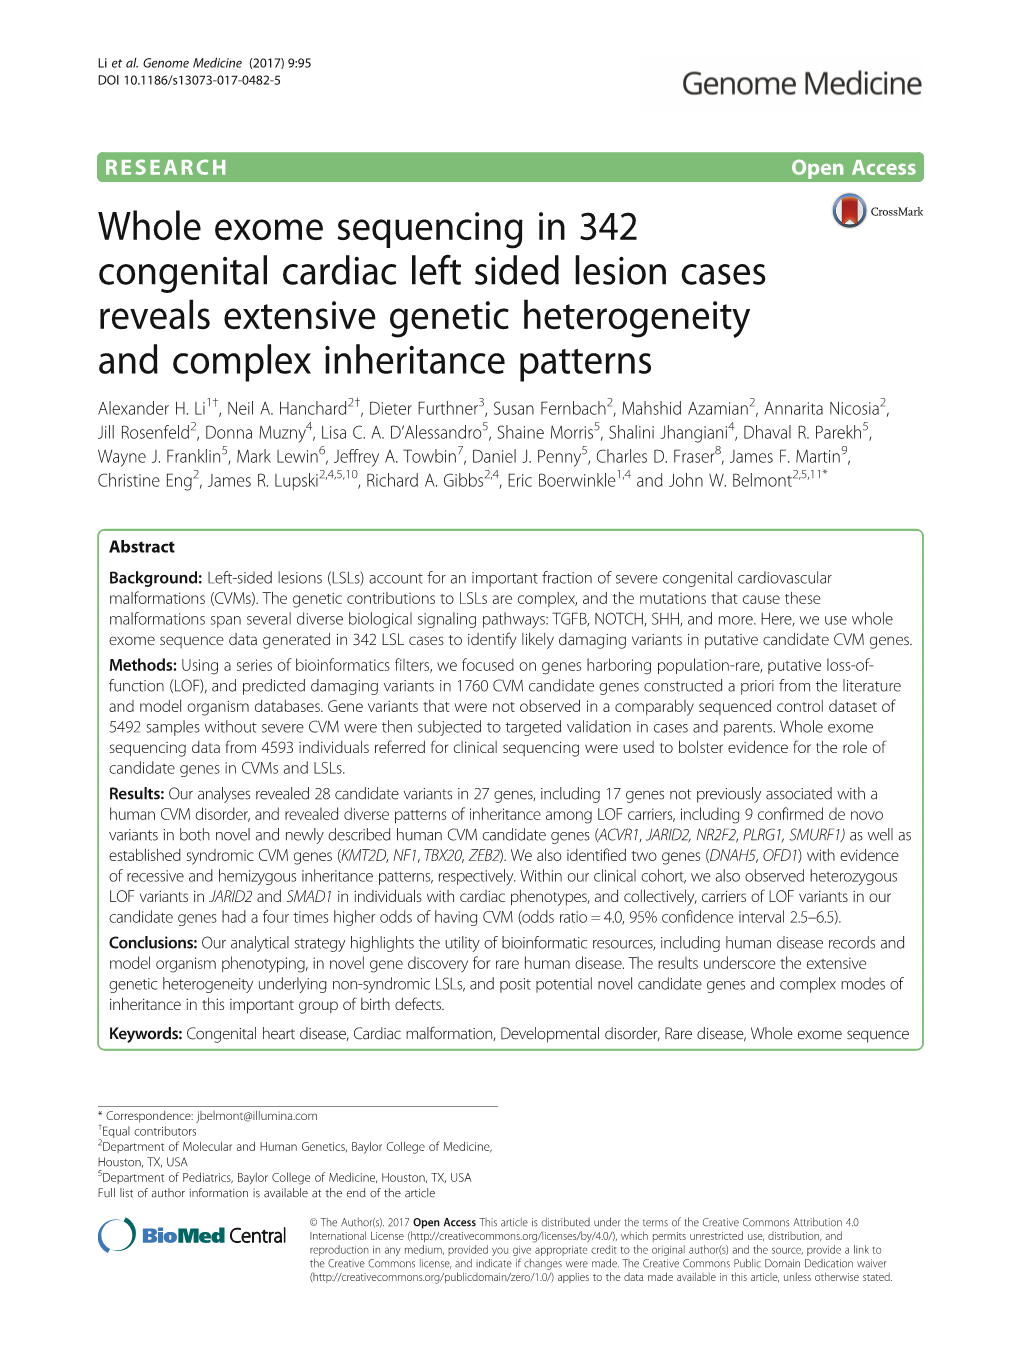 Whole Exome Sequencing in 342 Congenital Cardiac Left Sided Lesion Cases Reveals Extensive Genetic Heterogeneity and Complex Inheritance Patterns Alexander H